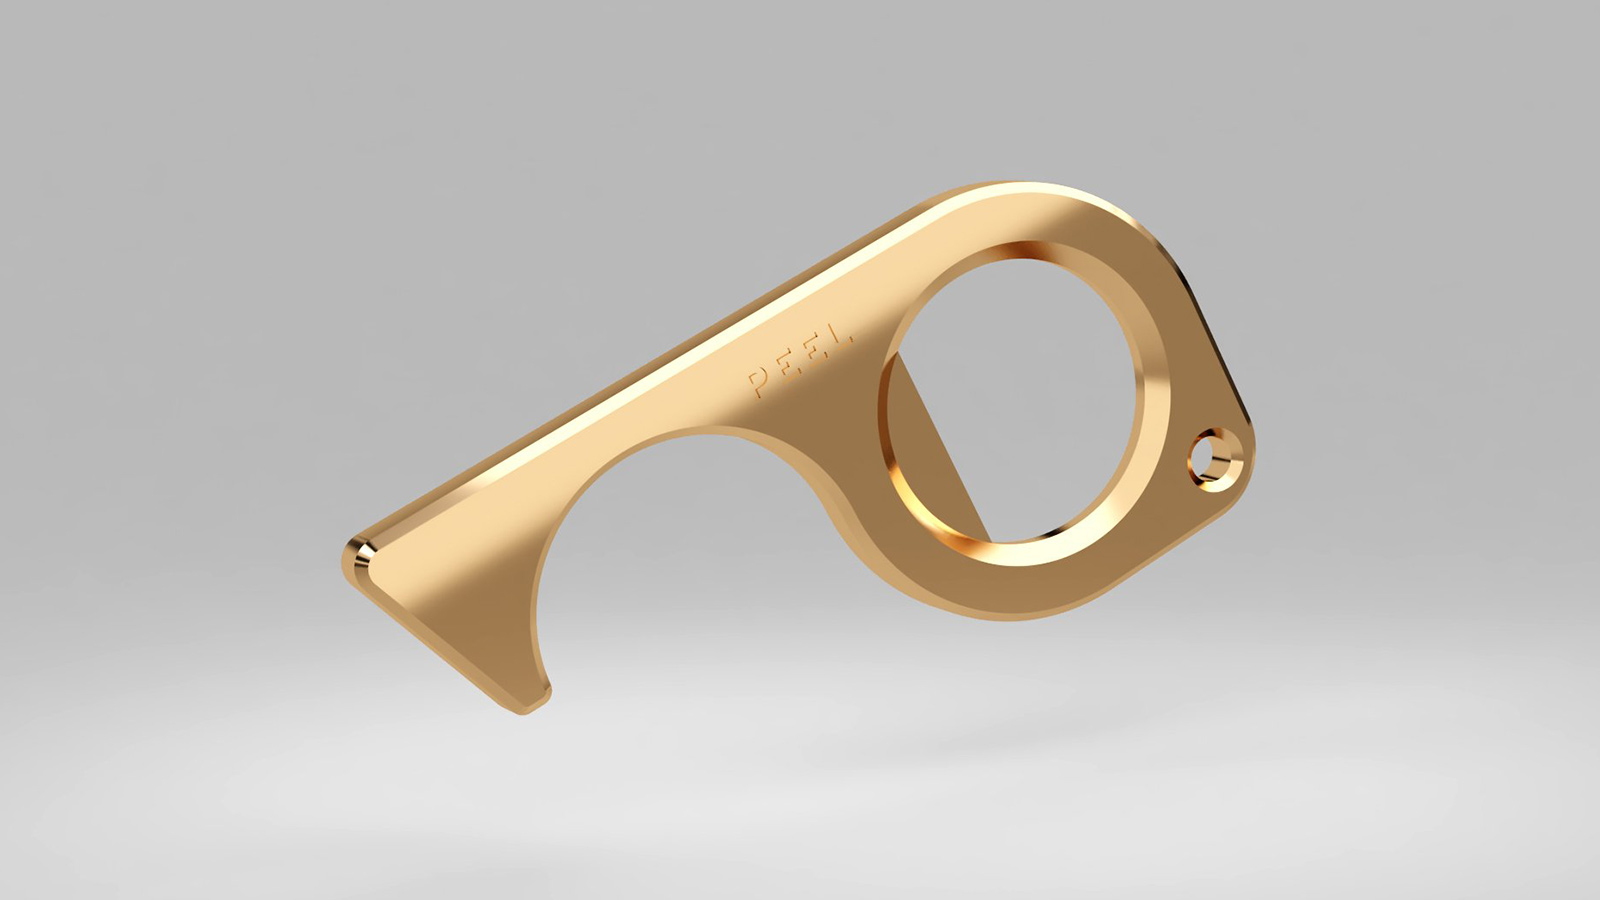 Peel Brass Keychain Touch Tool